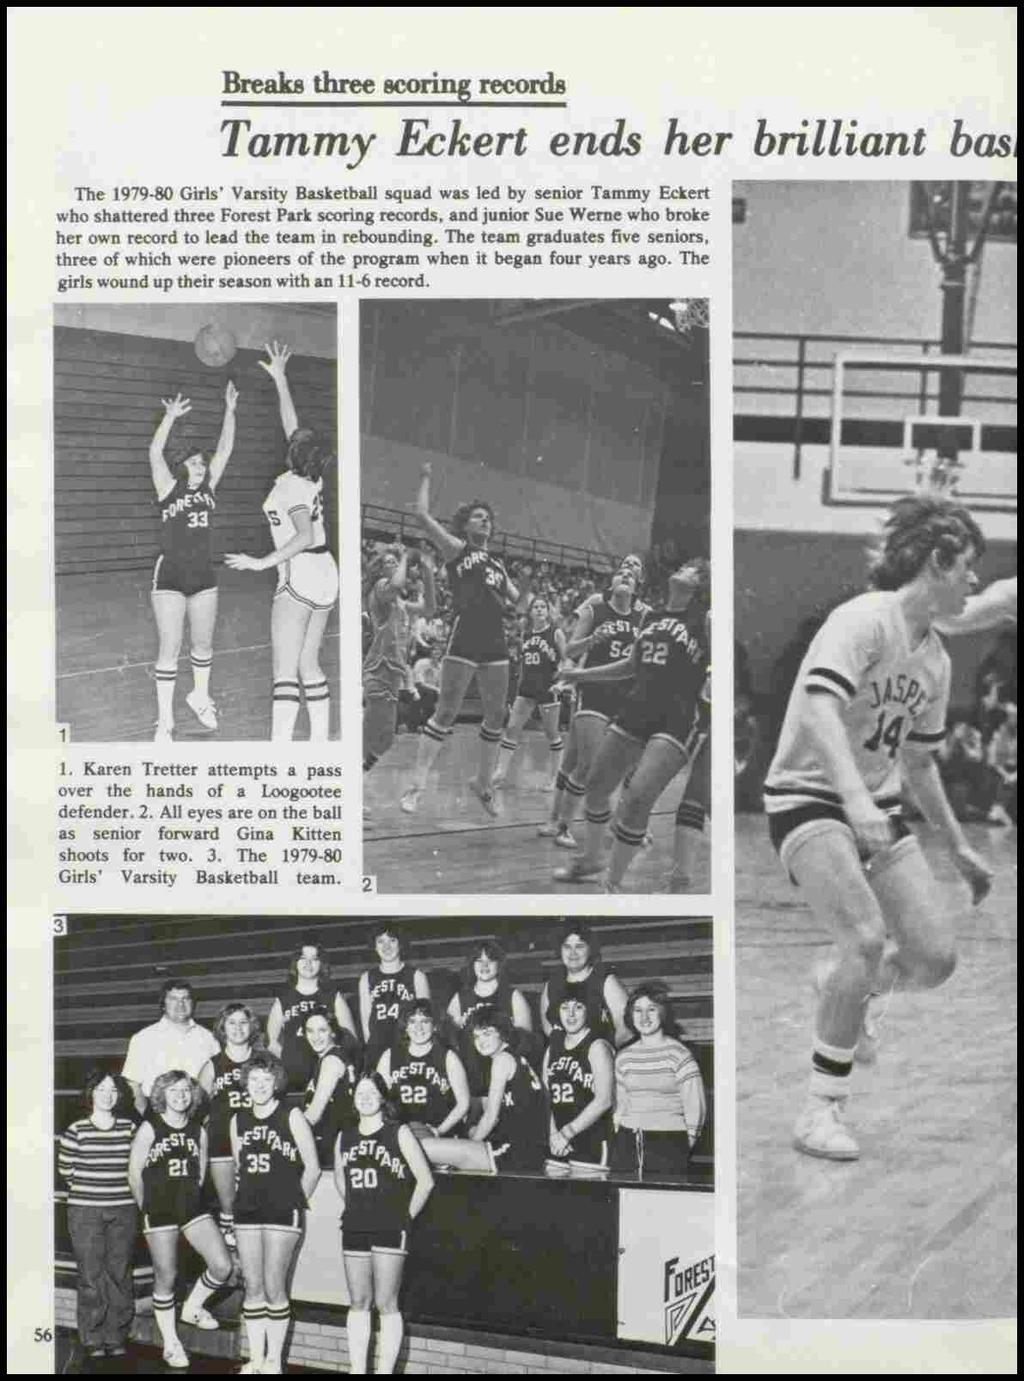 Breaks three scoring records Tammy Eckert ends her brilliant bas The 1979-80 Girls' Varsity Basketball squad was led by senior Tammy Eckert who shattered three Forest Park scoring records, and junior